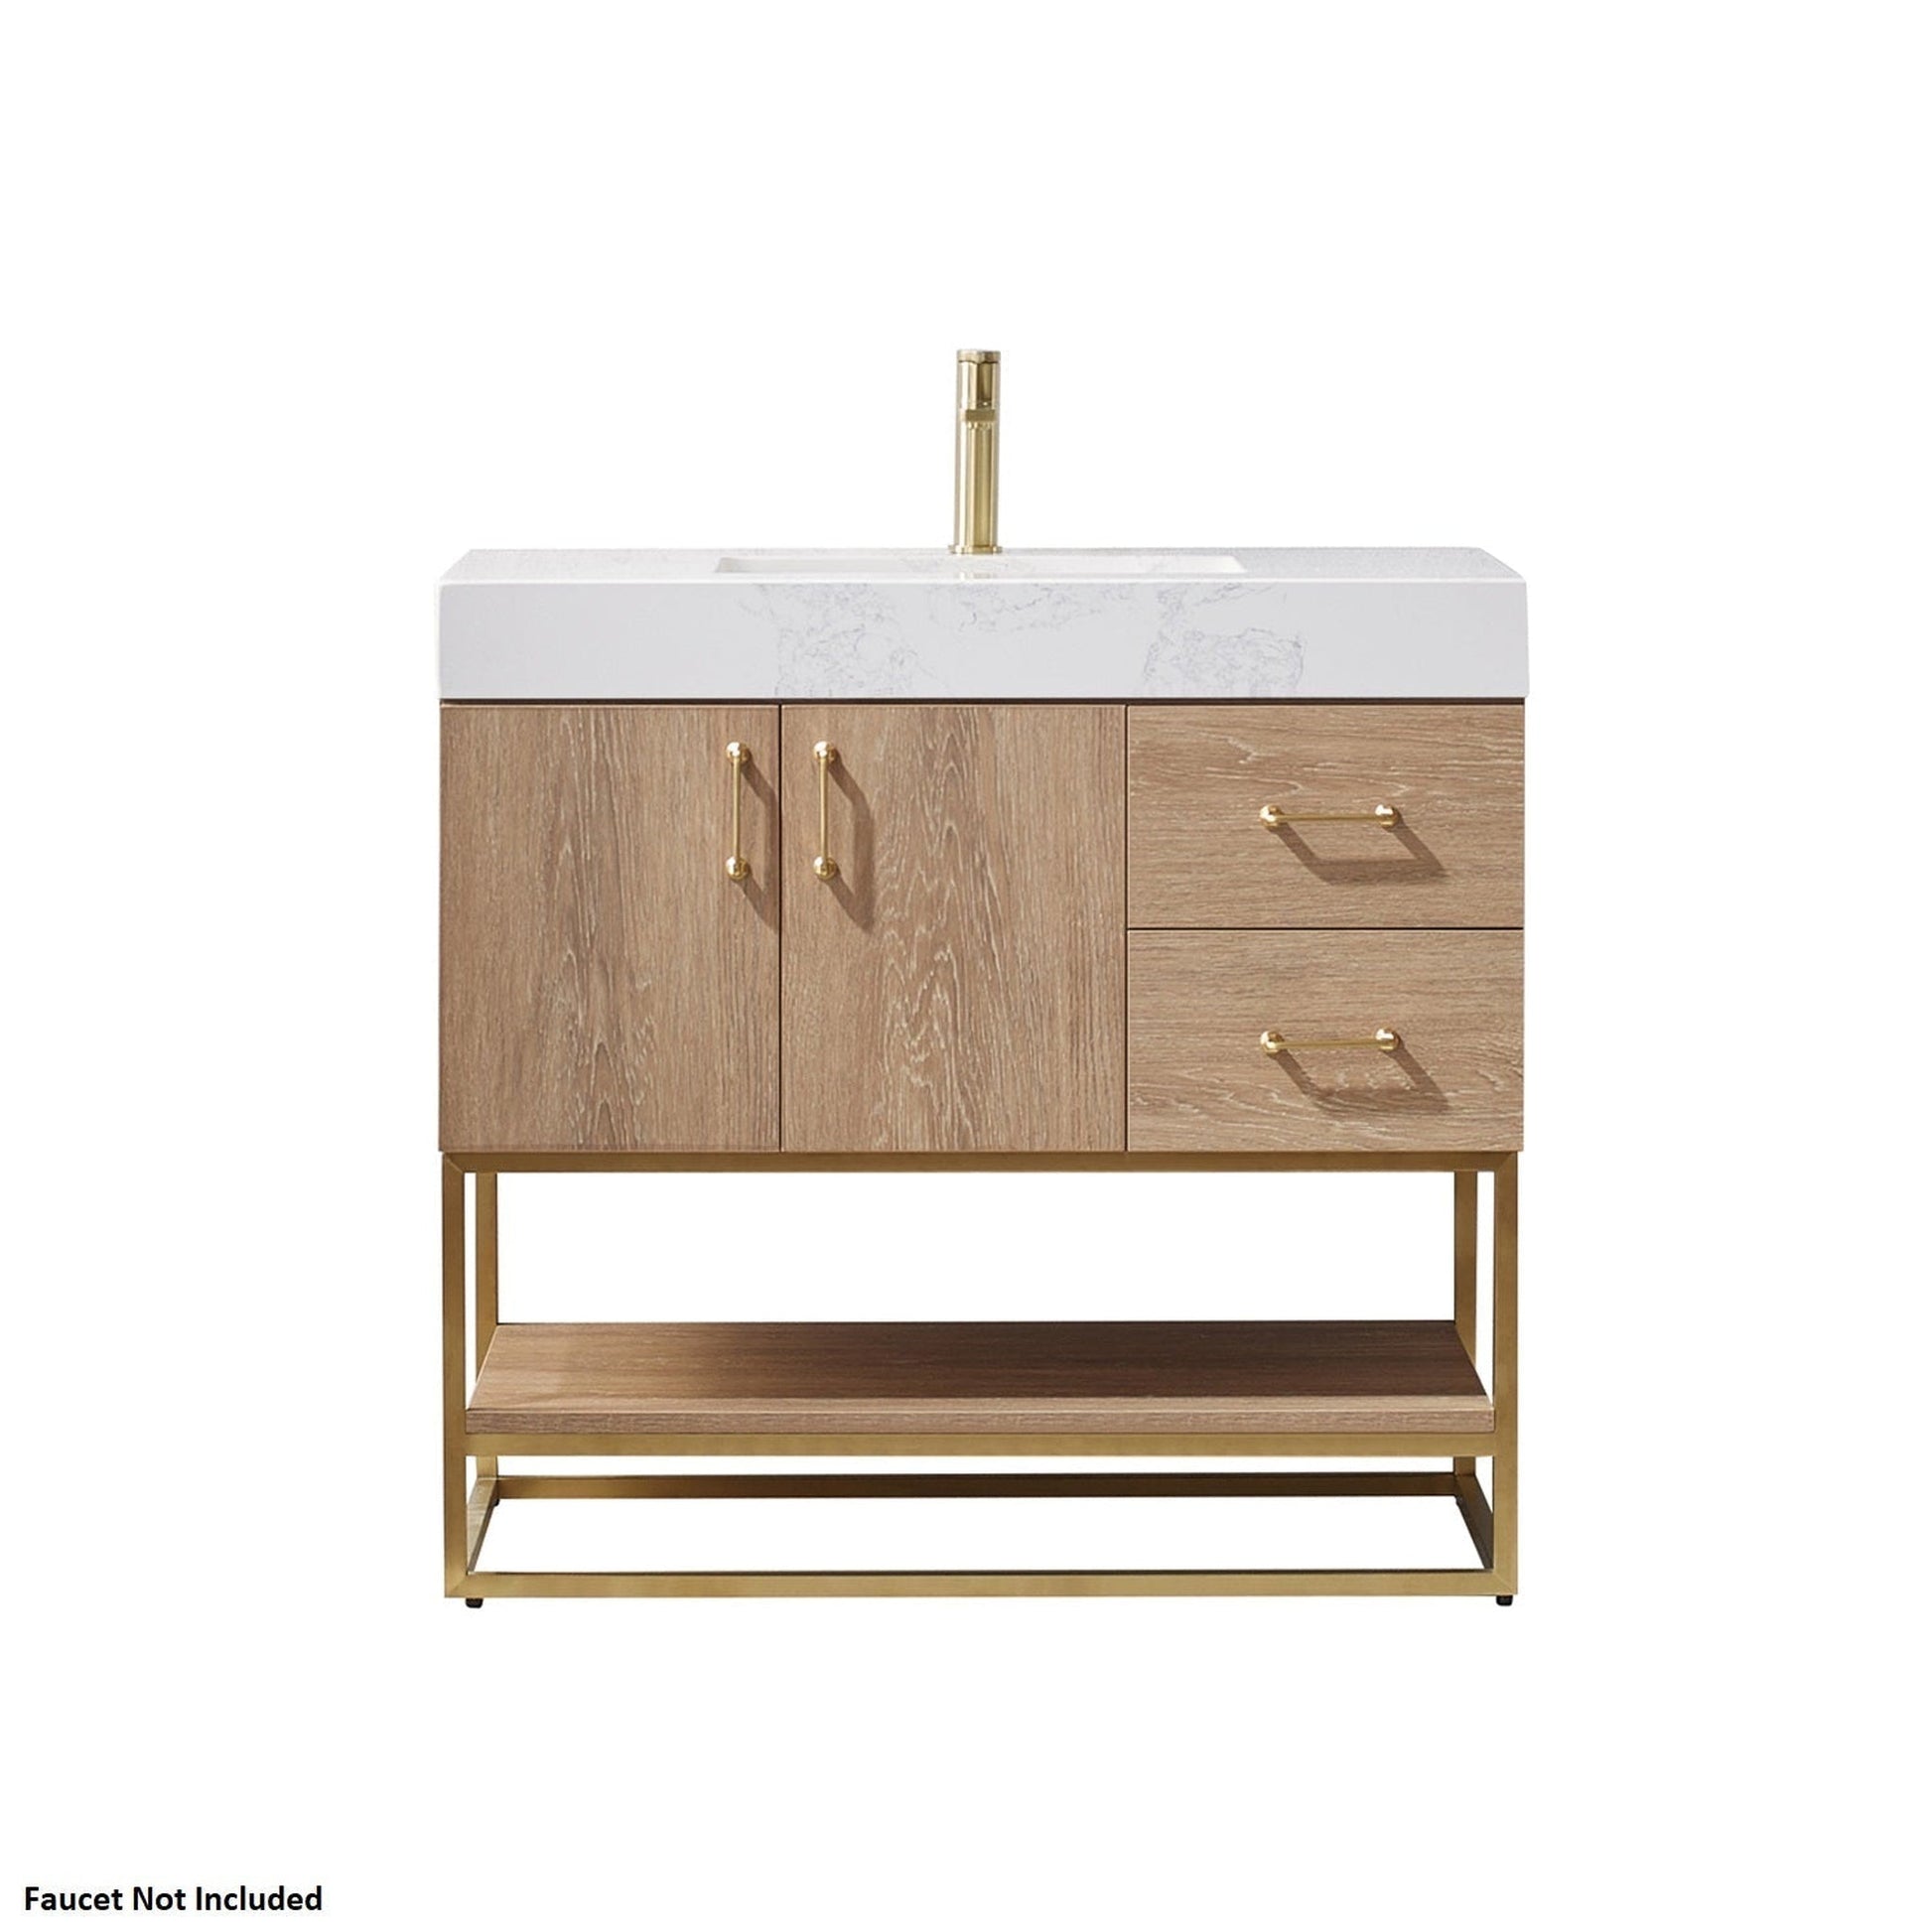 Vinnova Alistair 36" North American Oak Freestanding Single Vanity Set In Brushed Gold Metal Bracket Support Base and White Grain Stone Top With Undermount Ceramic Sink